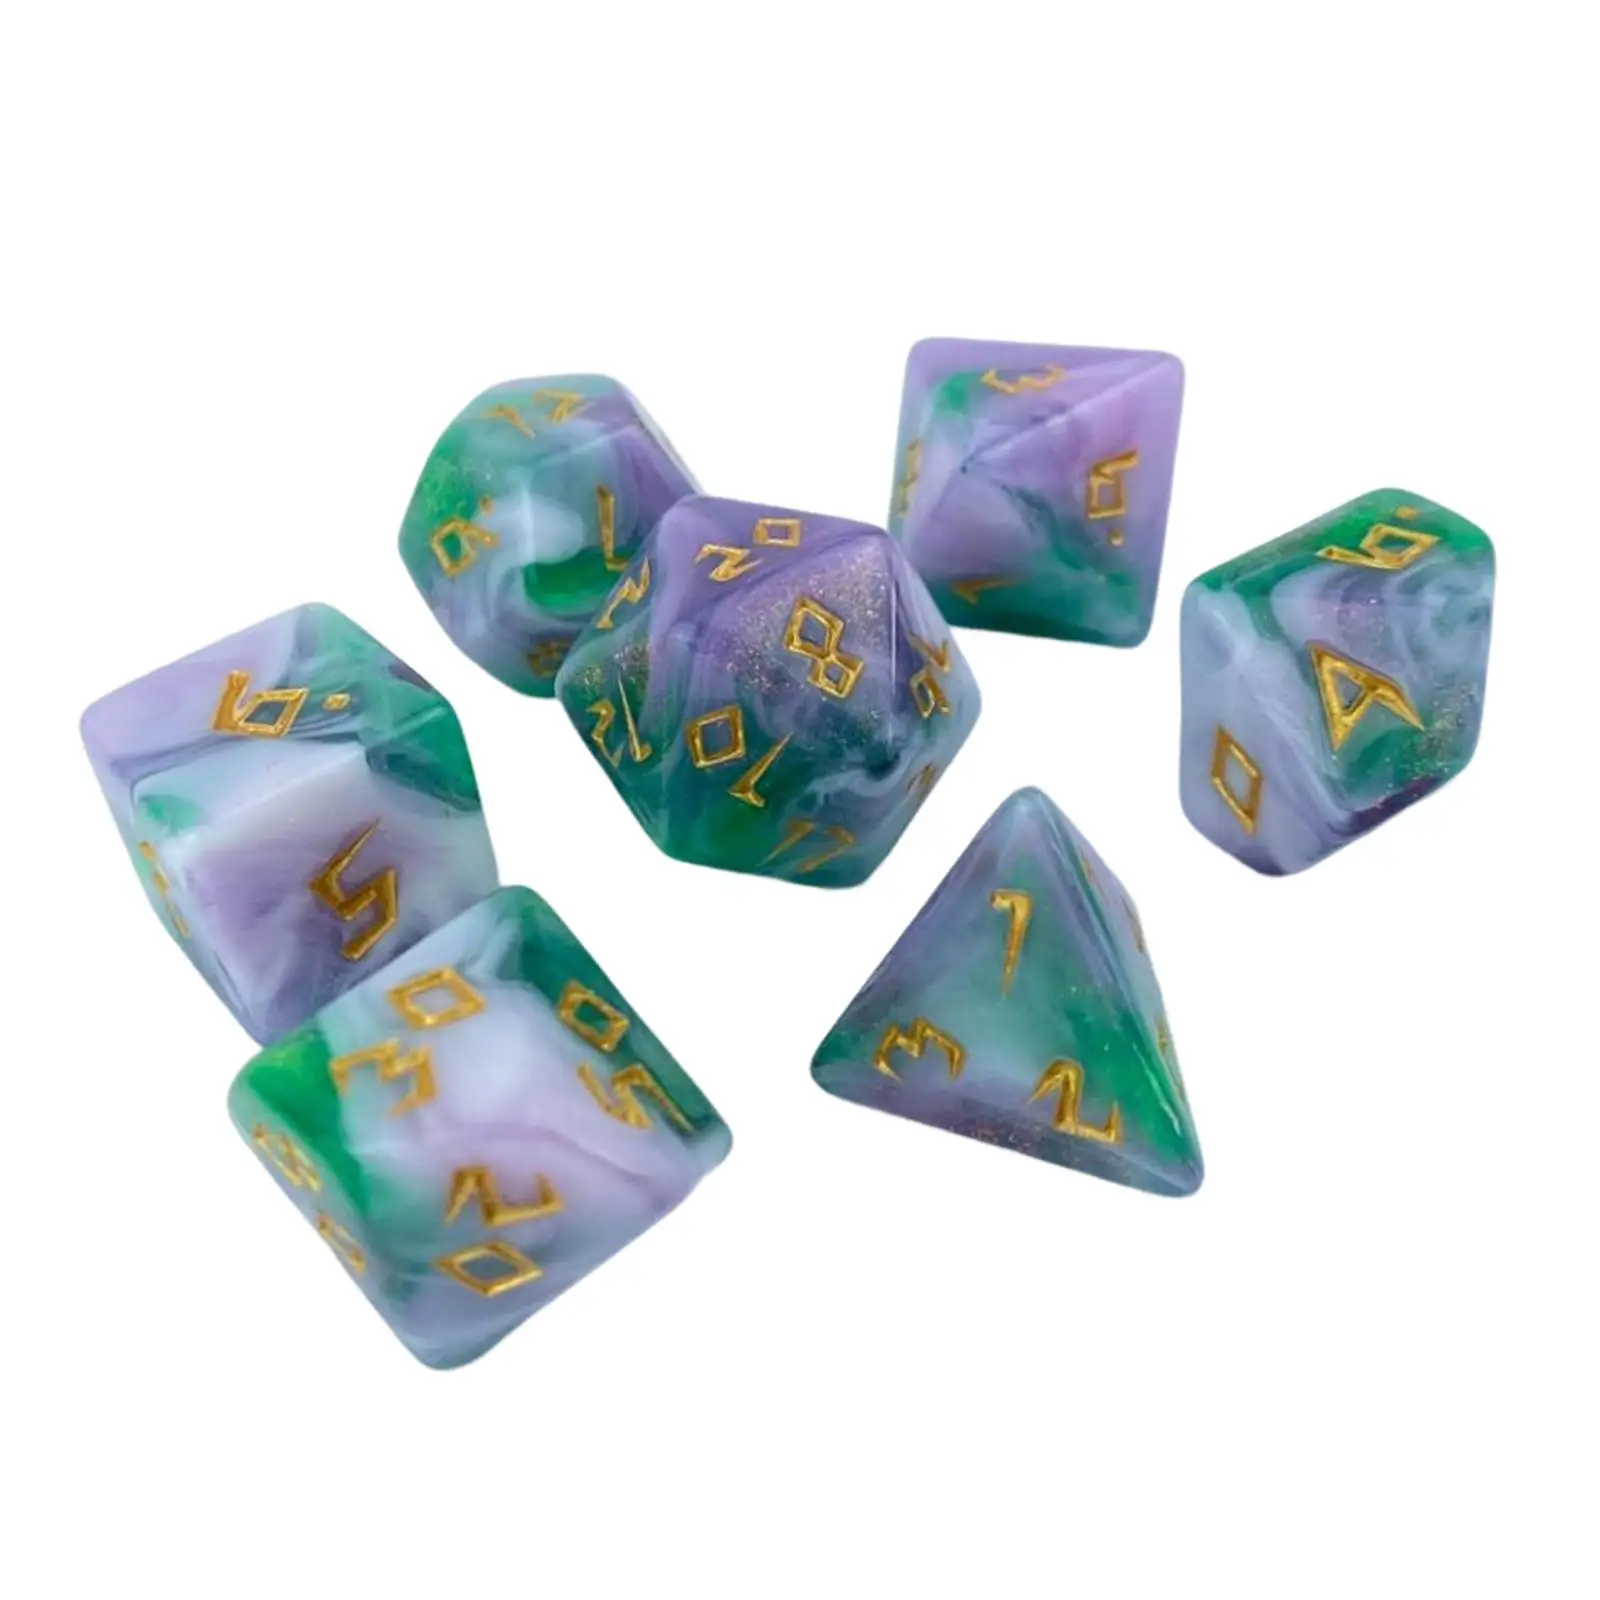 7x Gaming Dice, Multi Sided Dices, Acrylic Polyhedral Dice, for Role Playing Table Game